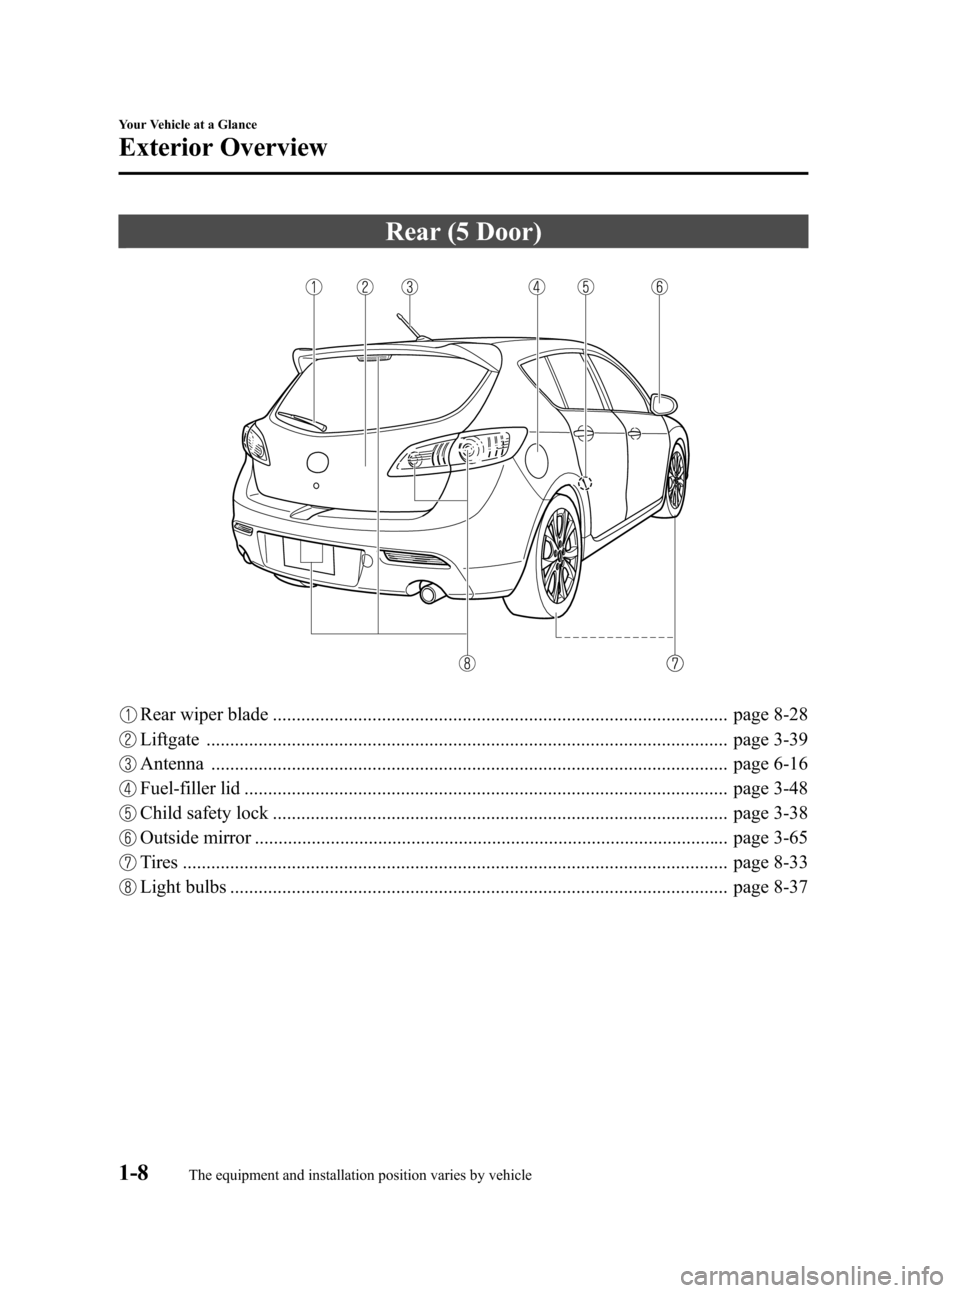 MAZDA MODEL 3 HATCHBACK 2010  Owners Manual (in English) Black plate (14,1)
Rear (5 Door)
Rear wiper blade ................................................................................................ page 8-28
Liftgate ..................................